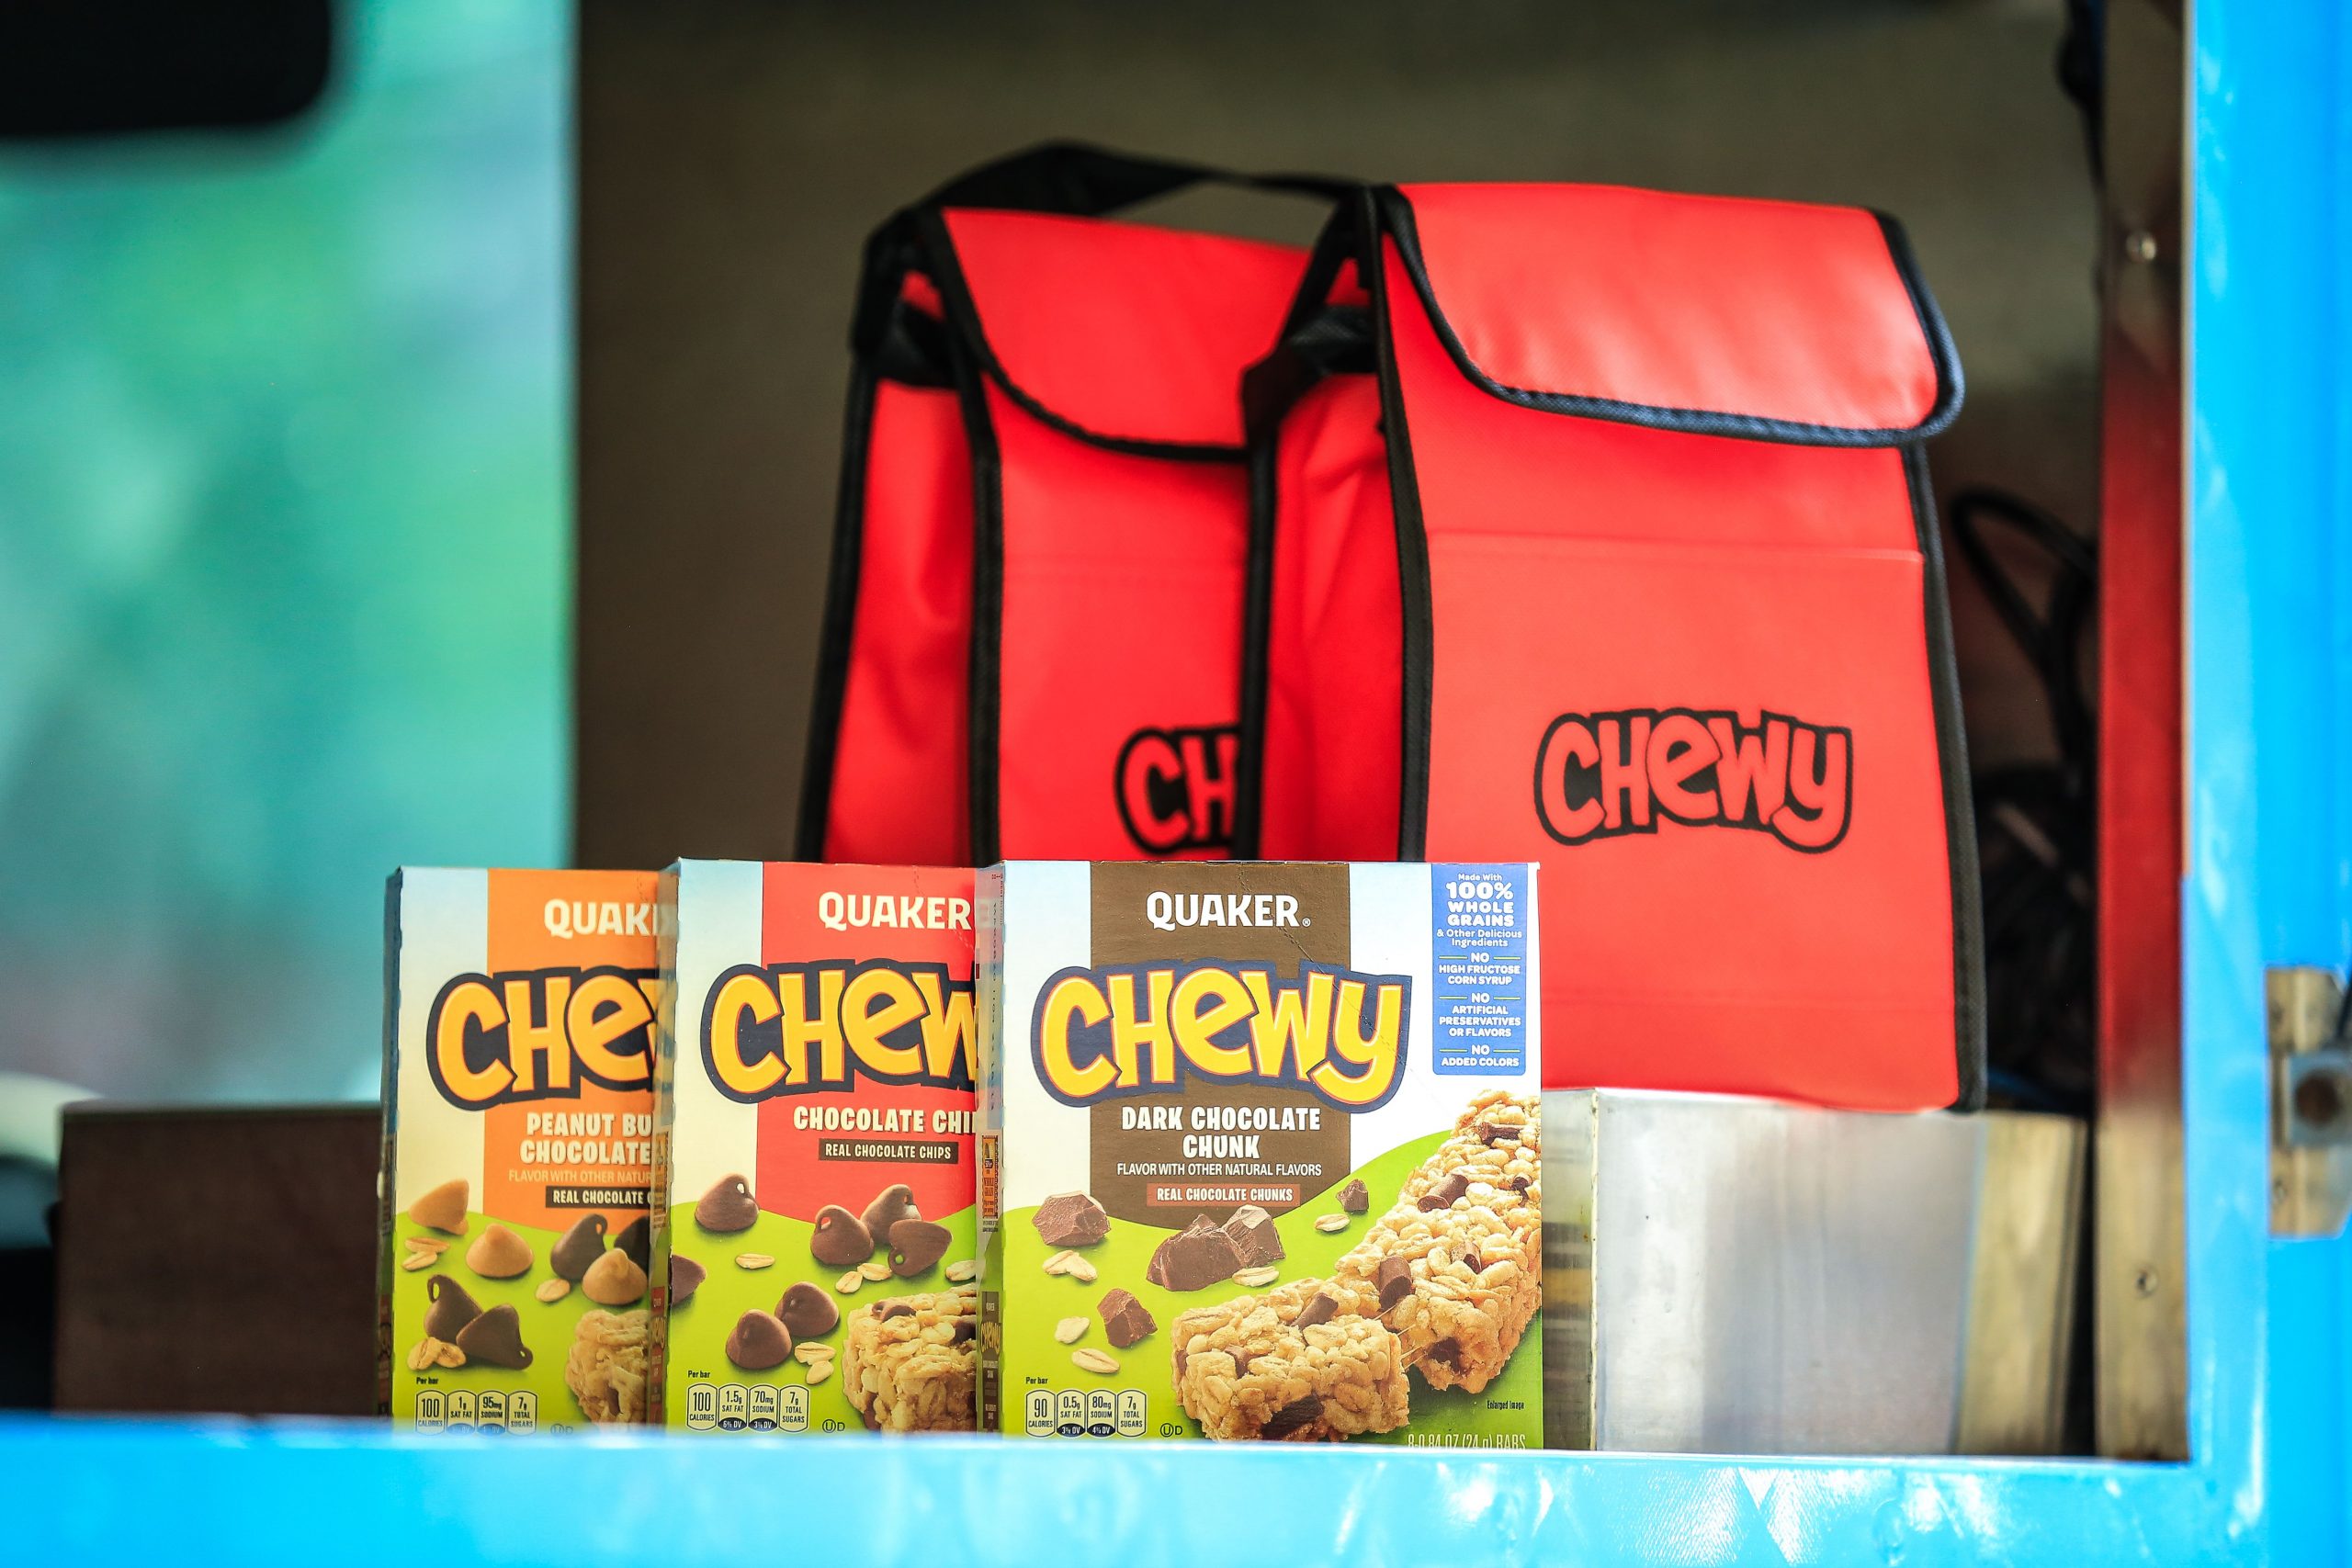 Chewy lunchboxes and snackbars